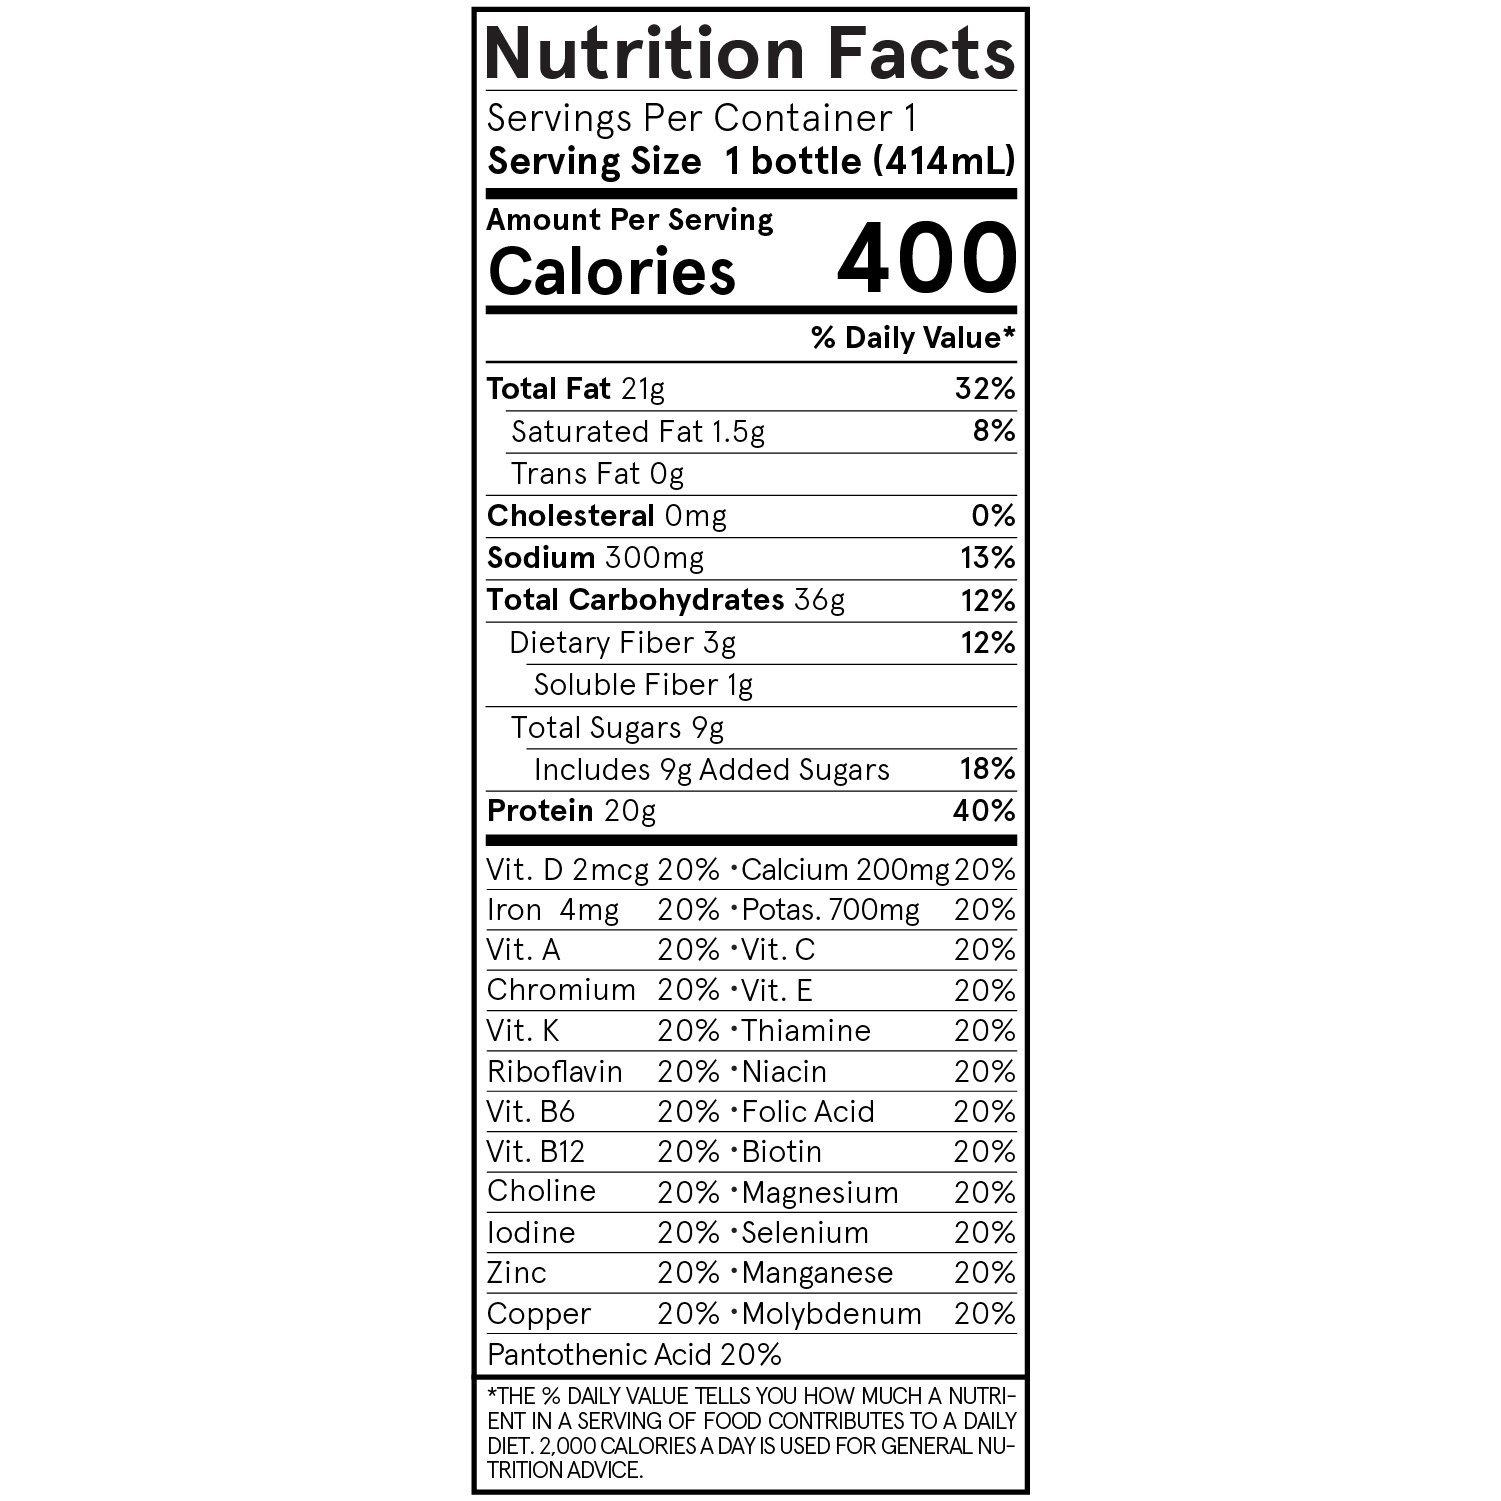 Soylent Meal Replacement Drink, Original, 14 oz Bottles, 12 Pack (Packaging May Vary)